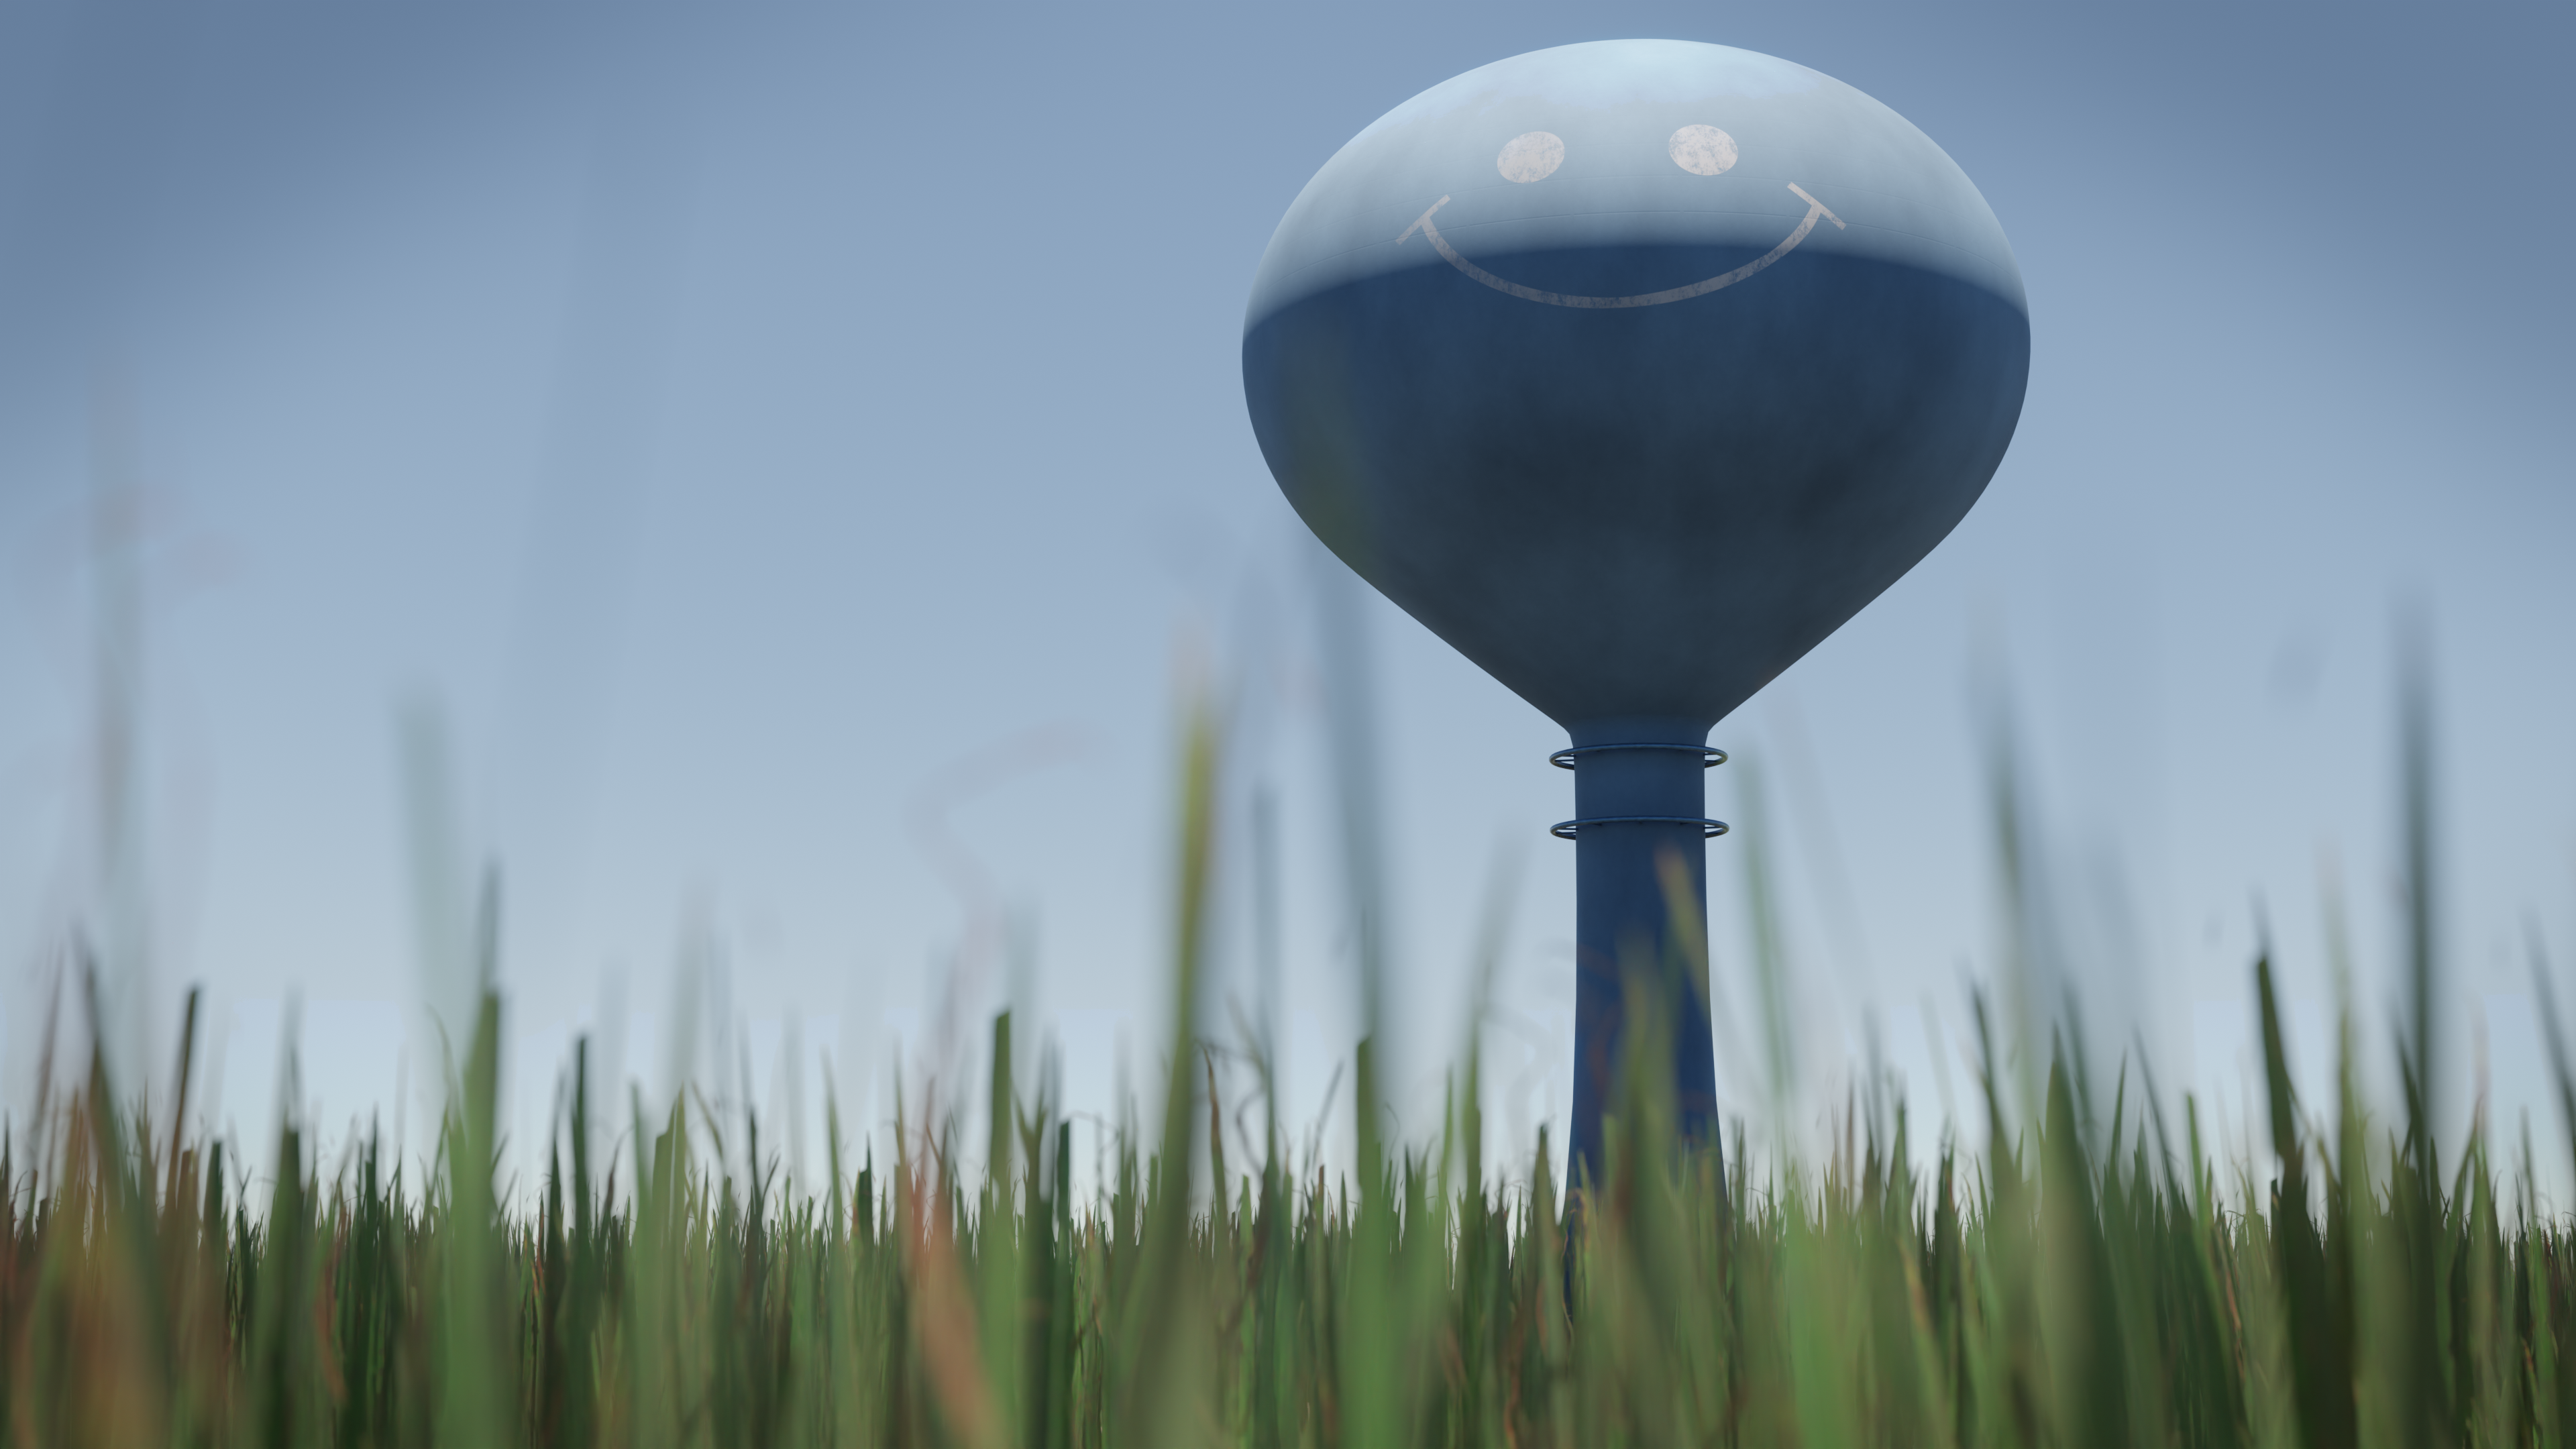 Smiling Water Tower preview image 1